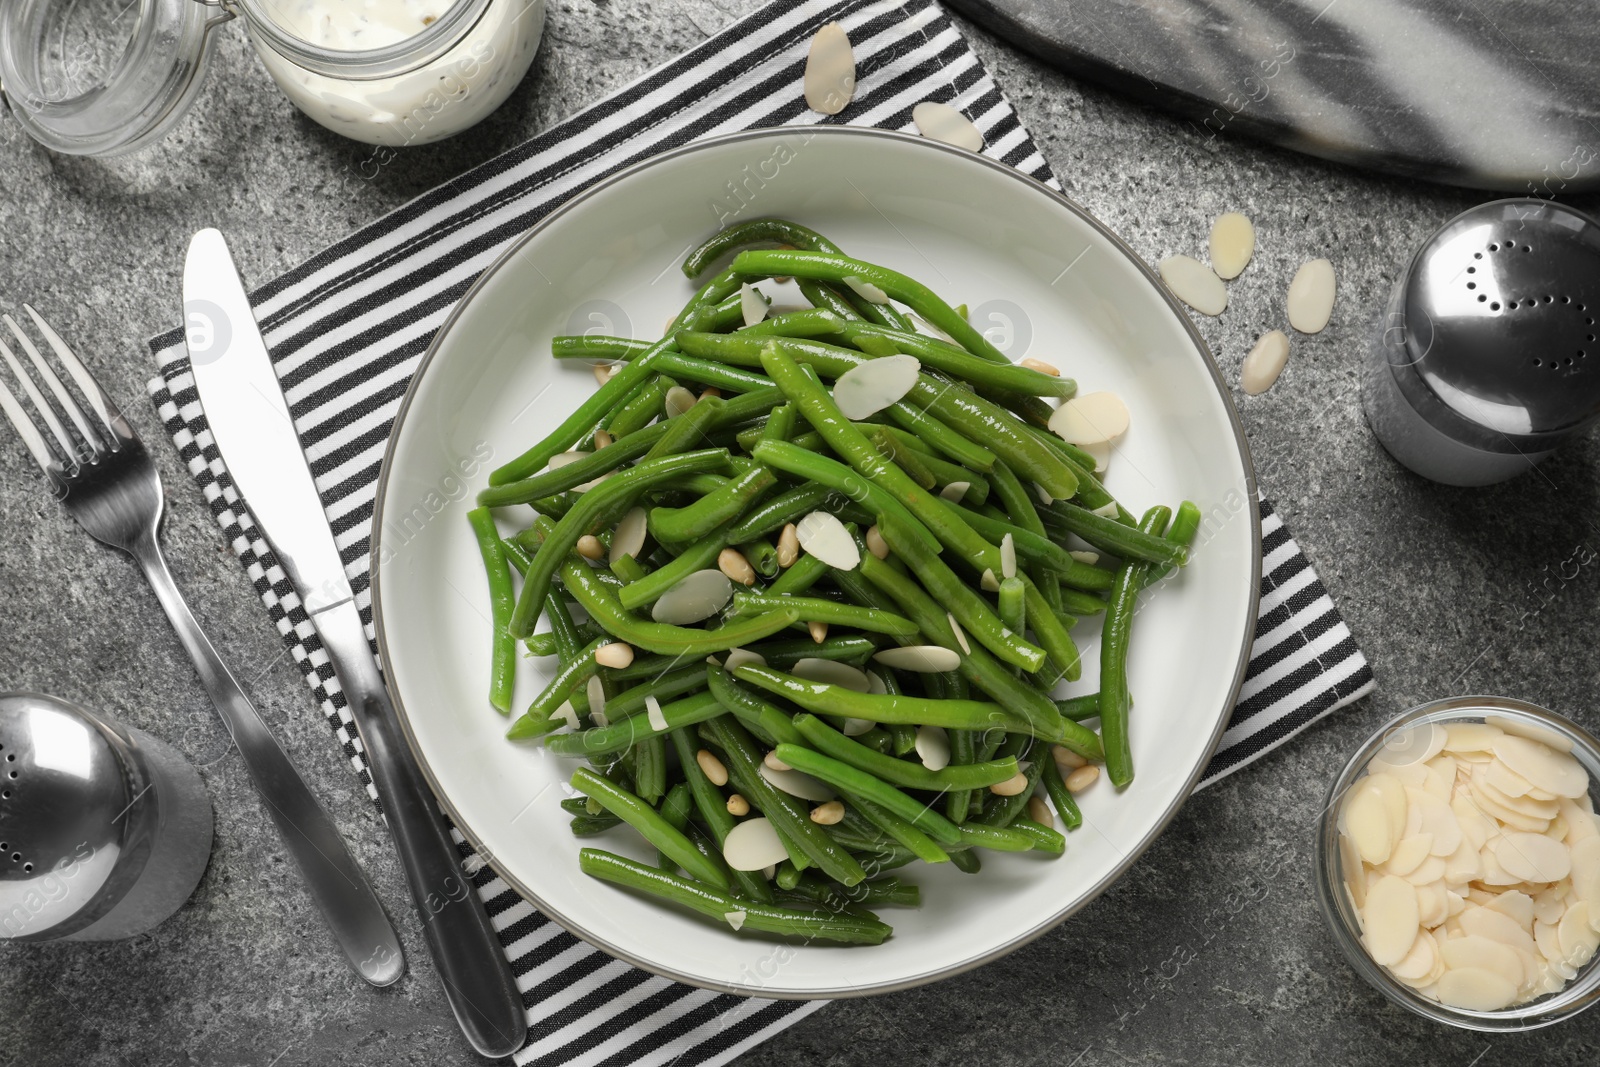 Photo of Tasty salad with green beans served on grey table, flat lay